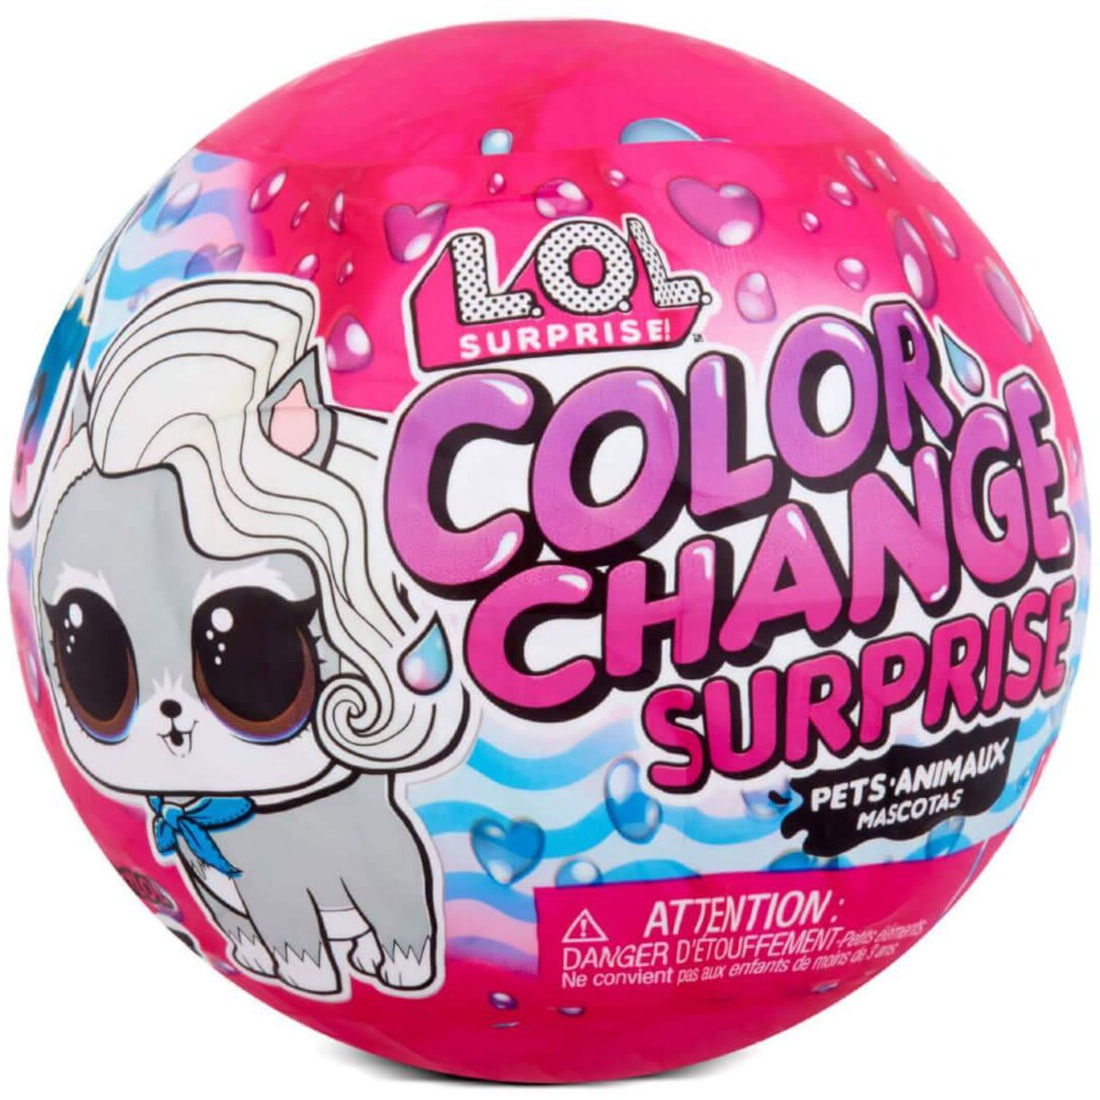 Image of Alternate - L.O.L. Surprise Color Change Pets Asst in PDQ, Puppe online einkaufen bei Alternate